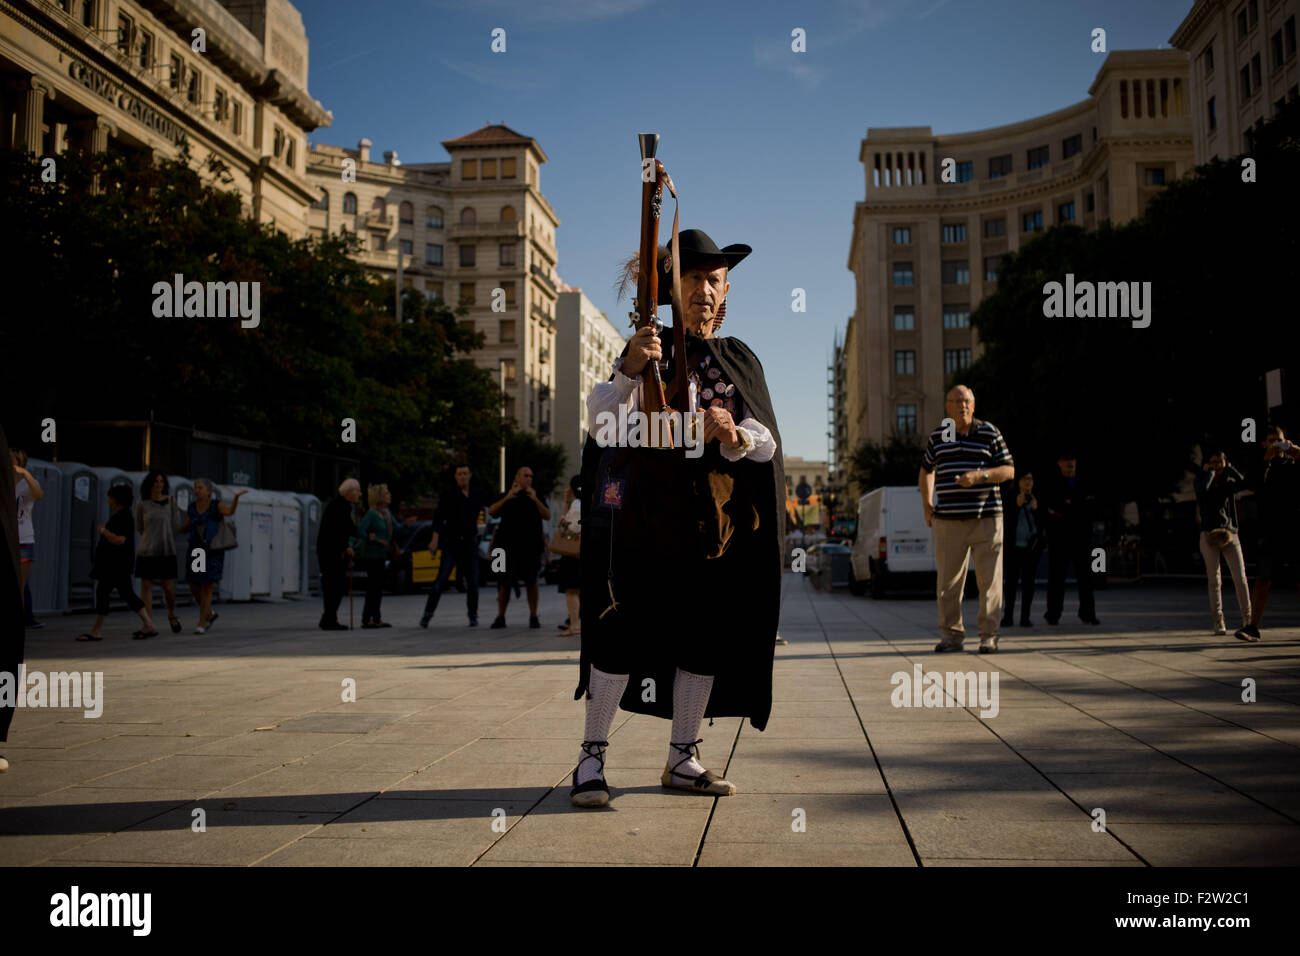 Barcelona, Catalonia, Spain. 24th Sep, 2015. A trabucaire through the streets of Barcelona on the occasion of the celebrations of the Merce Festival (Festes de la Merce) on 24 September 2015, Spain. The Galejada Trabucairemarks the beginning of the day of the patron saint of Barcelona, La Merce. Men and women dressed as ancient Catalan bandits take to the streets of the old part of Barcelona and cause a loud noise with his blunderbusses full of gunpowder. © Jordi Boixareu/ZUMA Wire/Alamy Live News Stock Photo